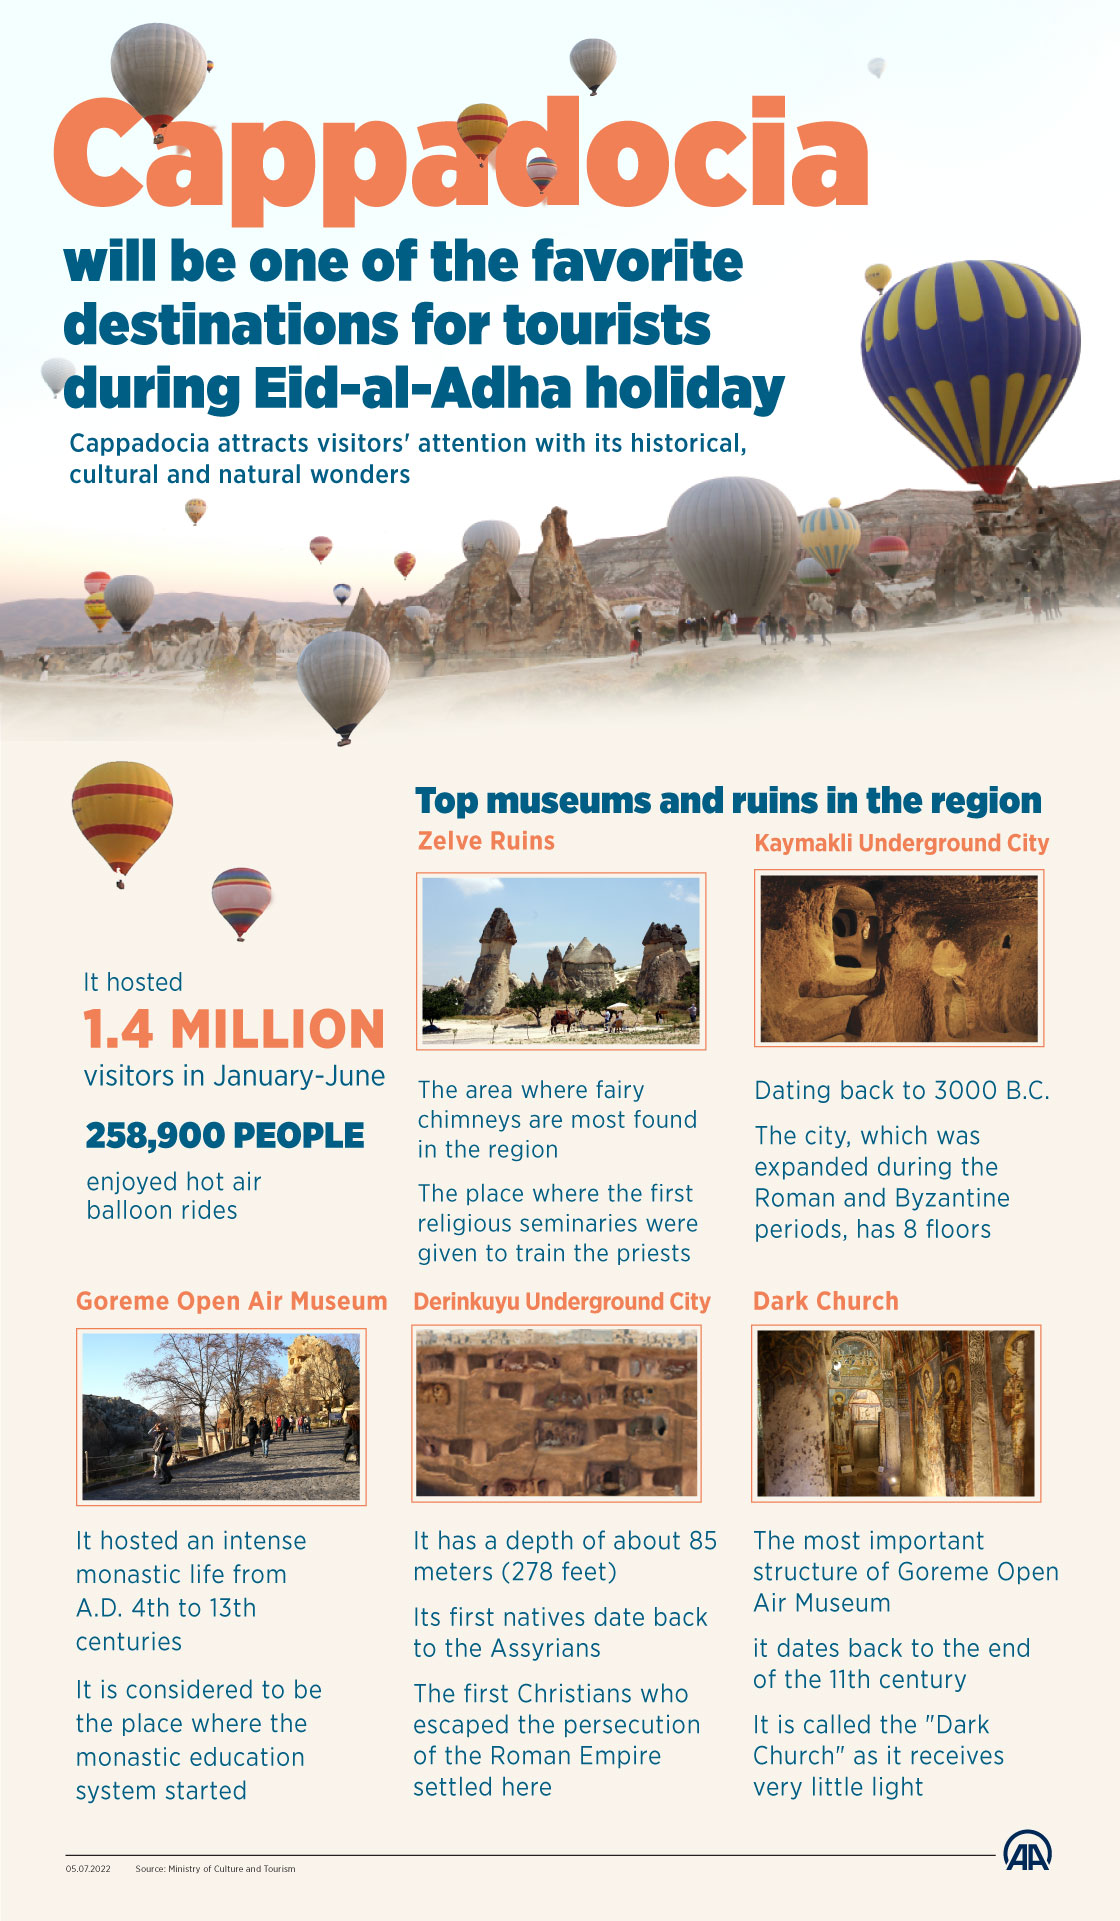 Cappadocia attracts visitors' attention with its historical, cultural and natural wonders